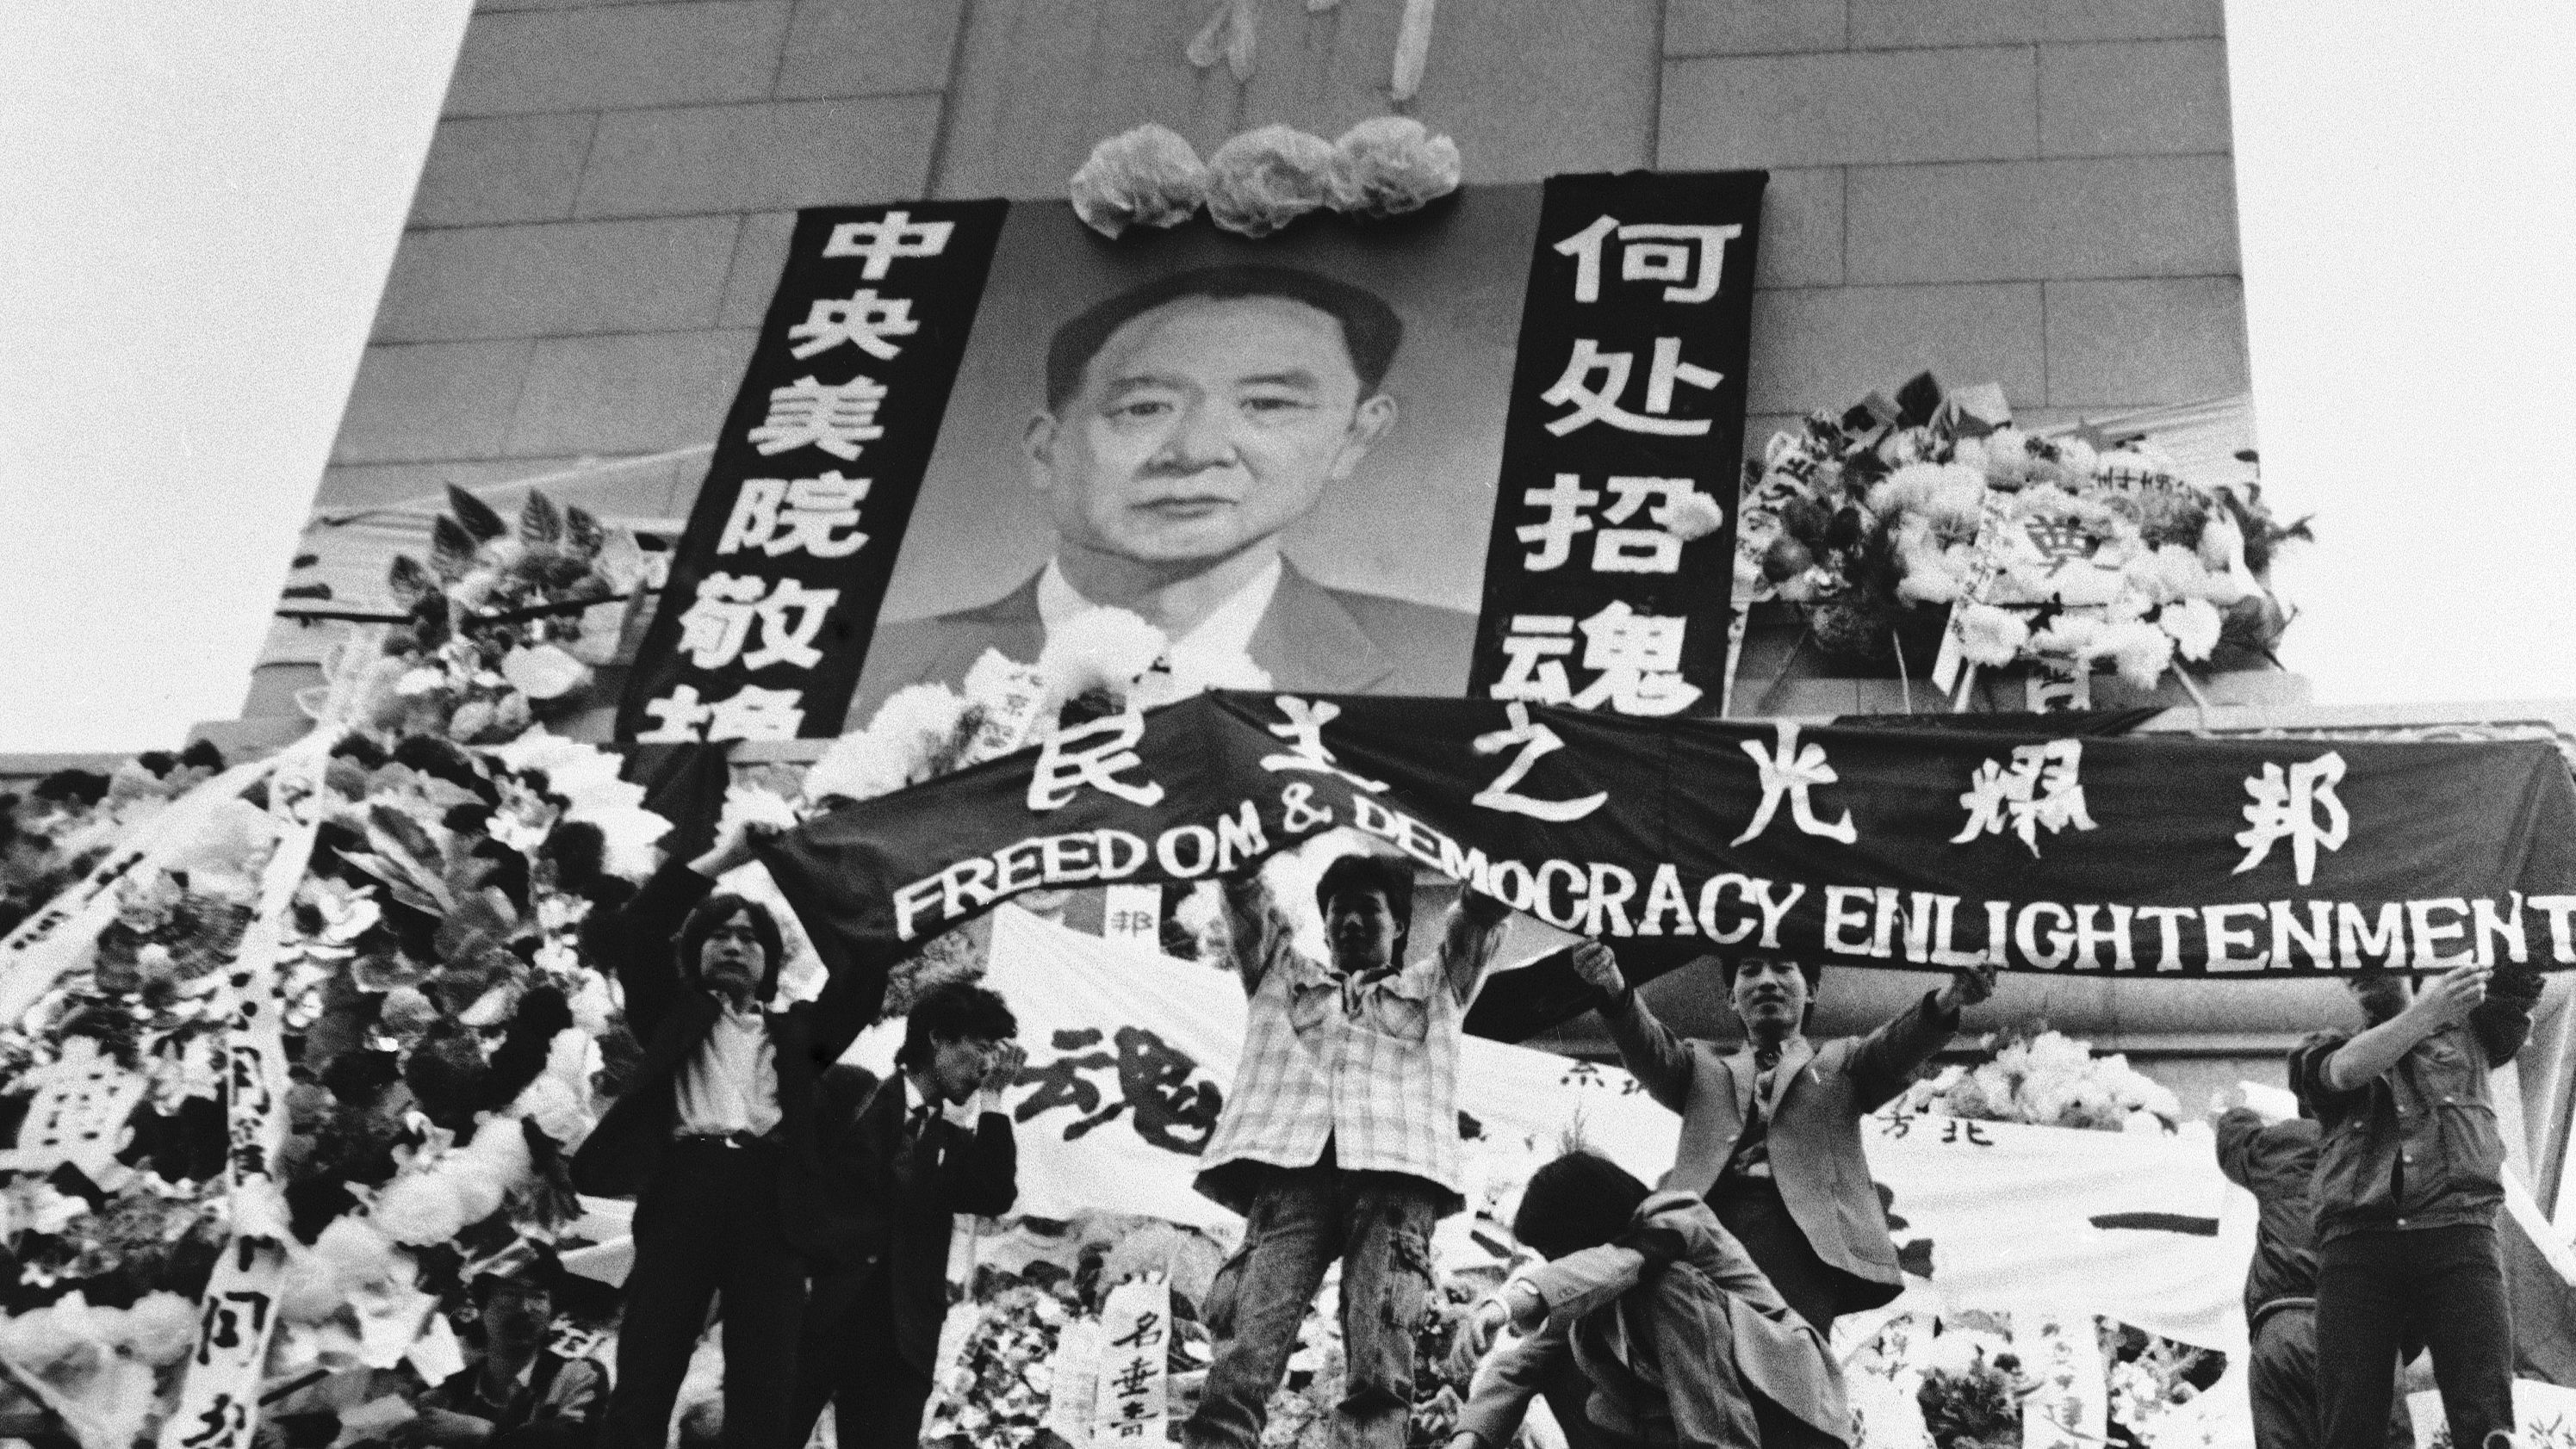 Chinese students hold aloft a banner calling for freedom, democracy and enlightenment on the Martyrs Monument in Beijing's Tiananmen Square, festooned with a giant portrait of Hu Yaobang, April 19, 1989.